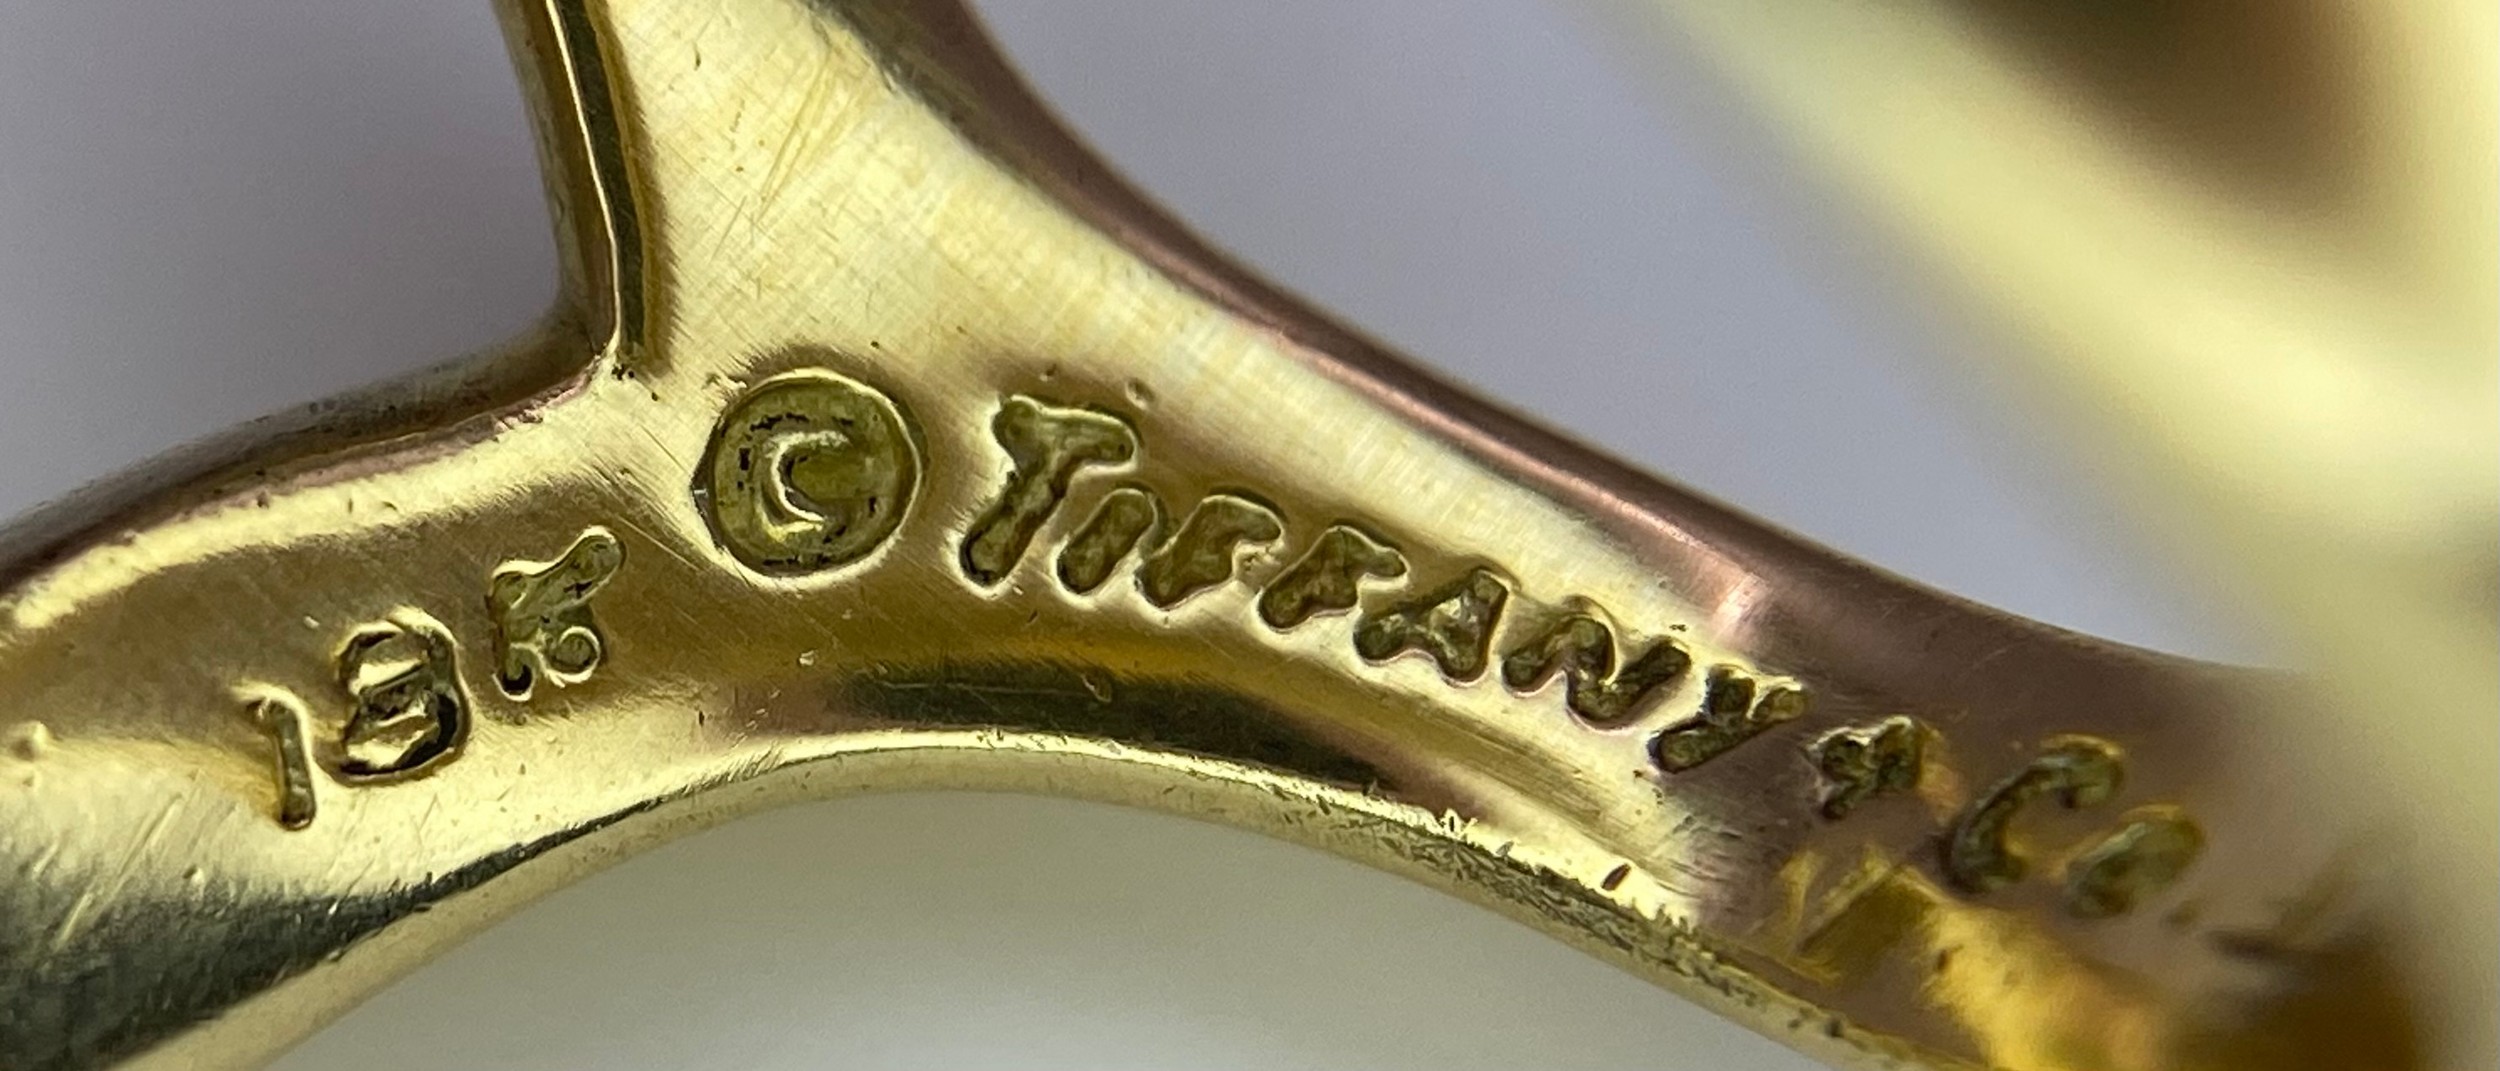 A 18K YELLOW GOLD TIFFANY & CO ELSA PERETTI HEART RING 10.1G SIZE H 1/2 SC 9062 - Image 7 of 8